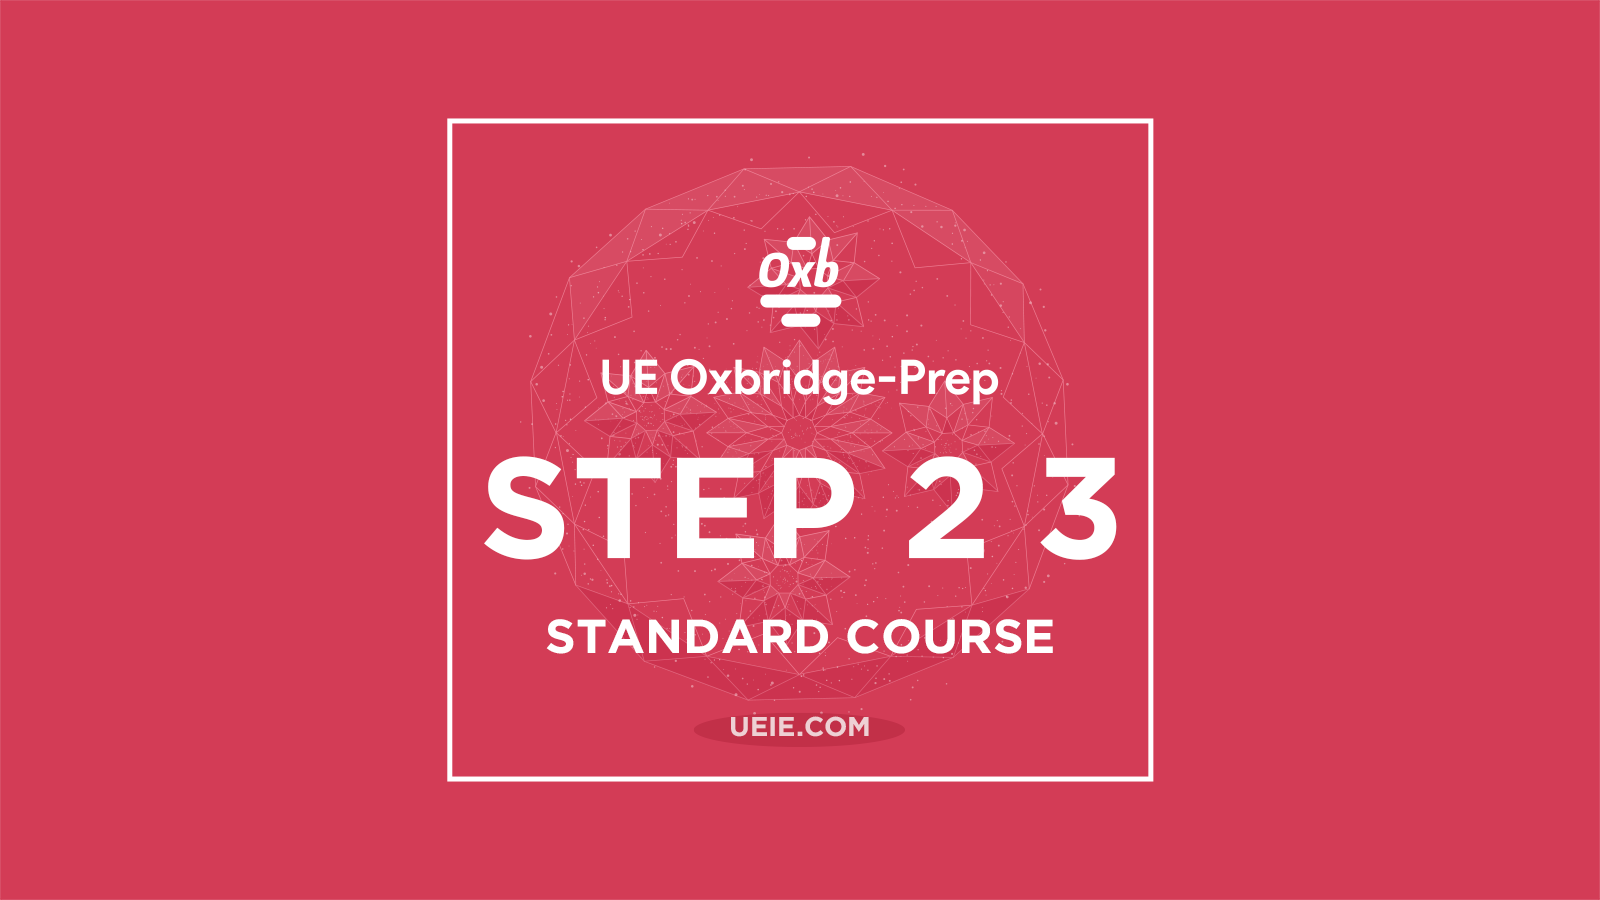 STEP 2 3 Standard Course